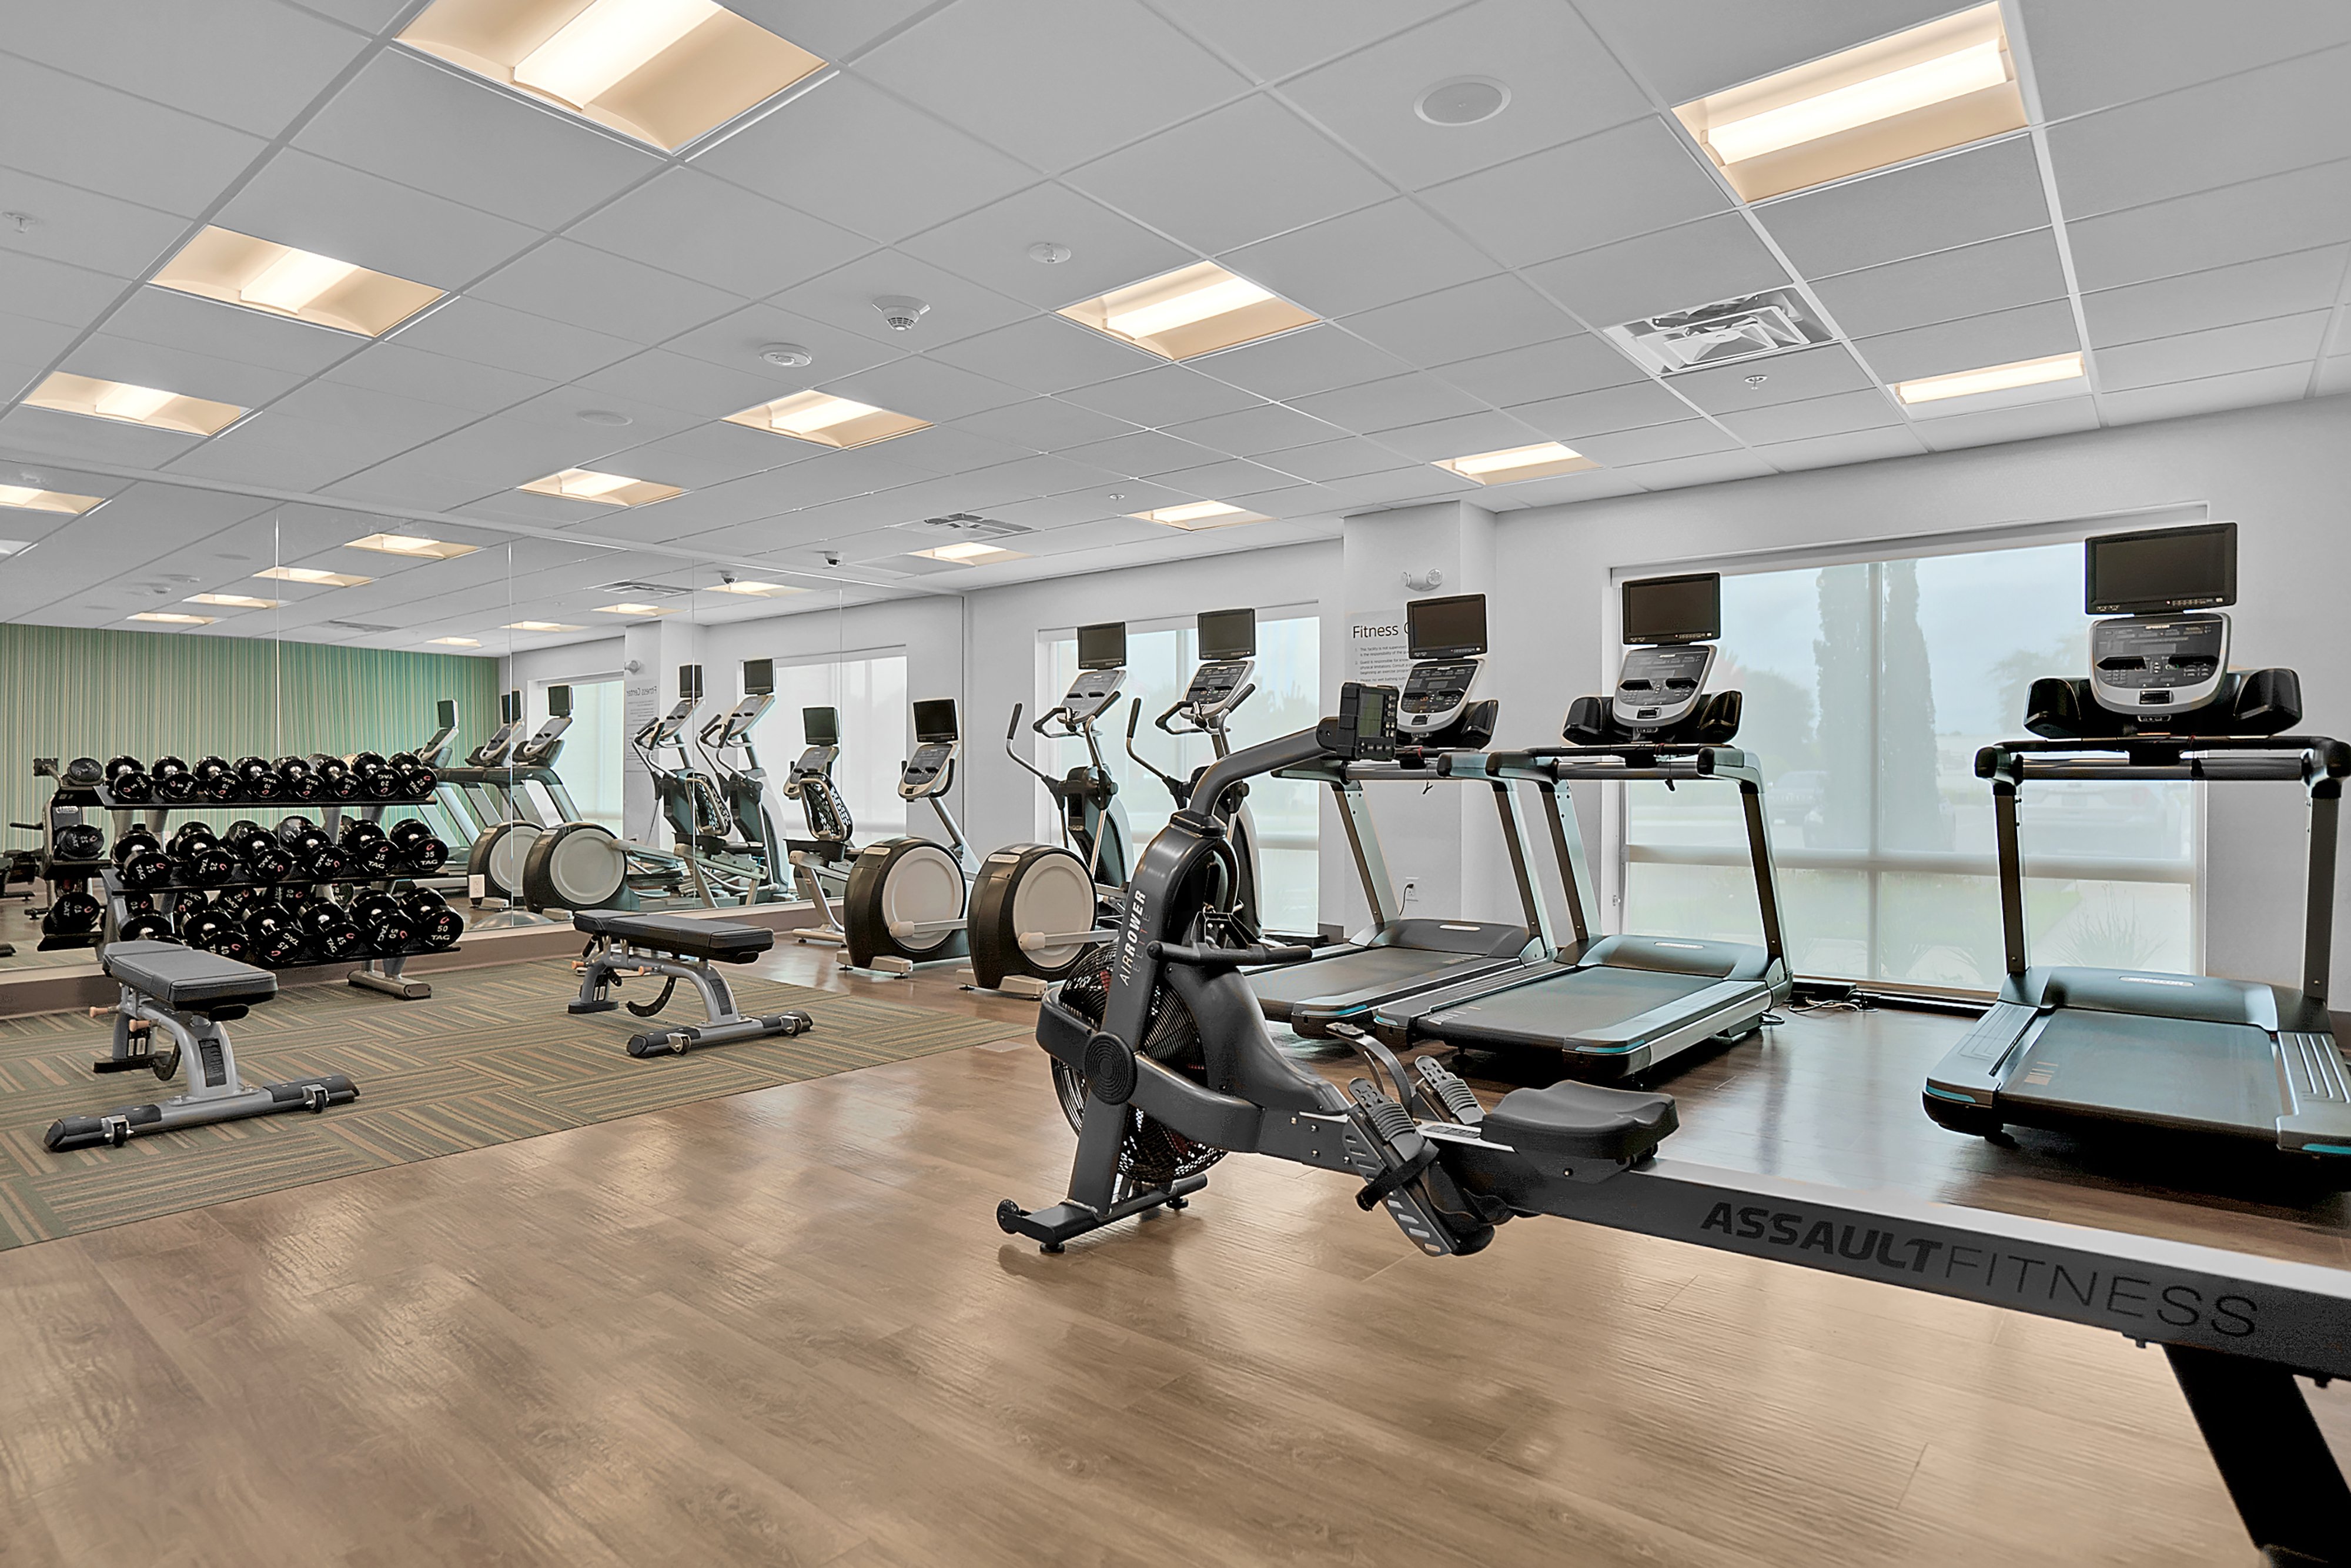 Elliptical machines & spacious room for multiple guests.